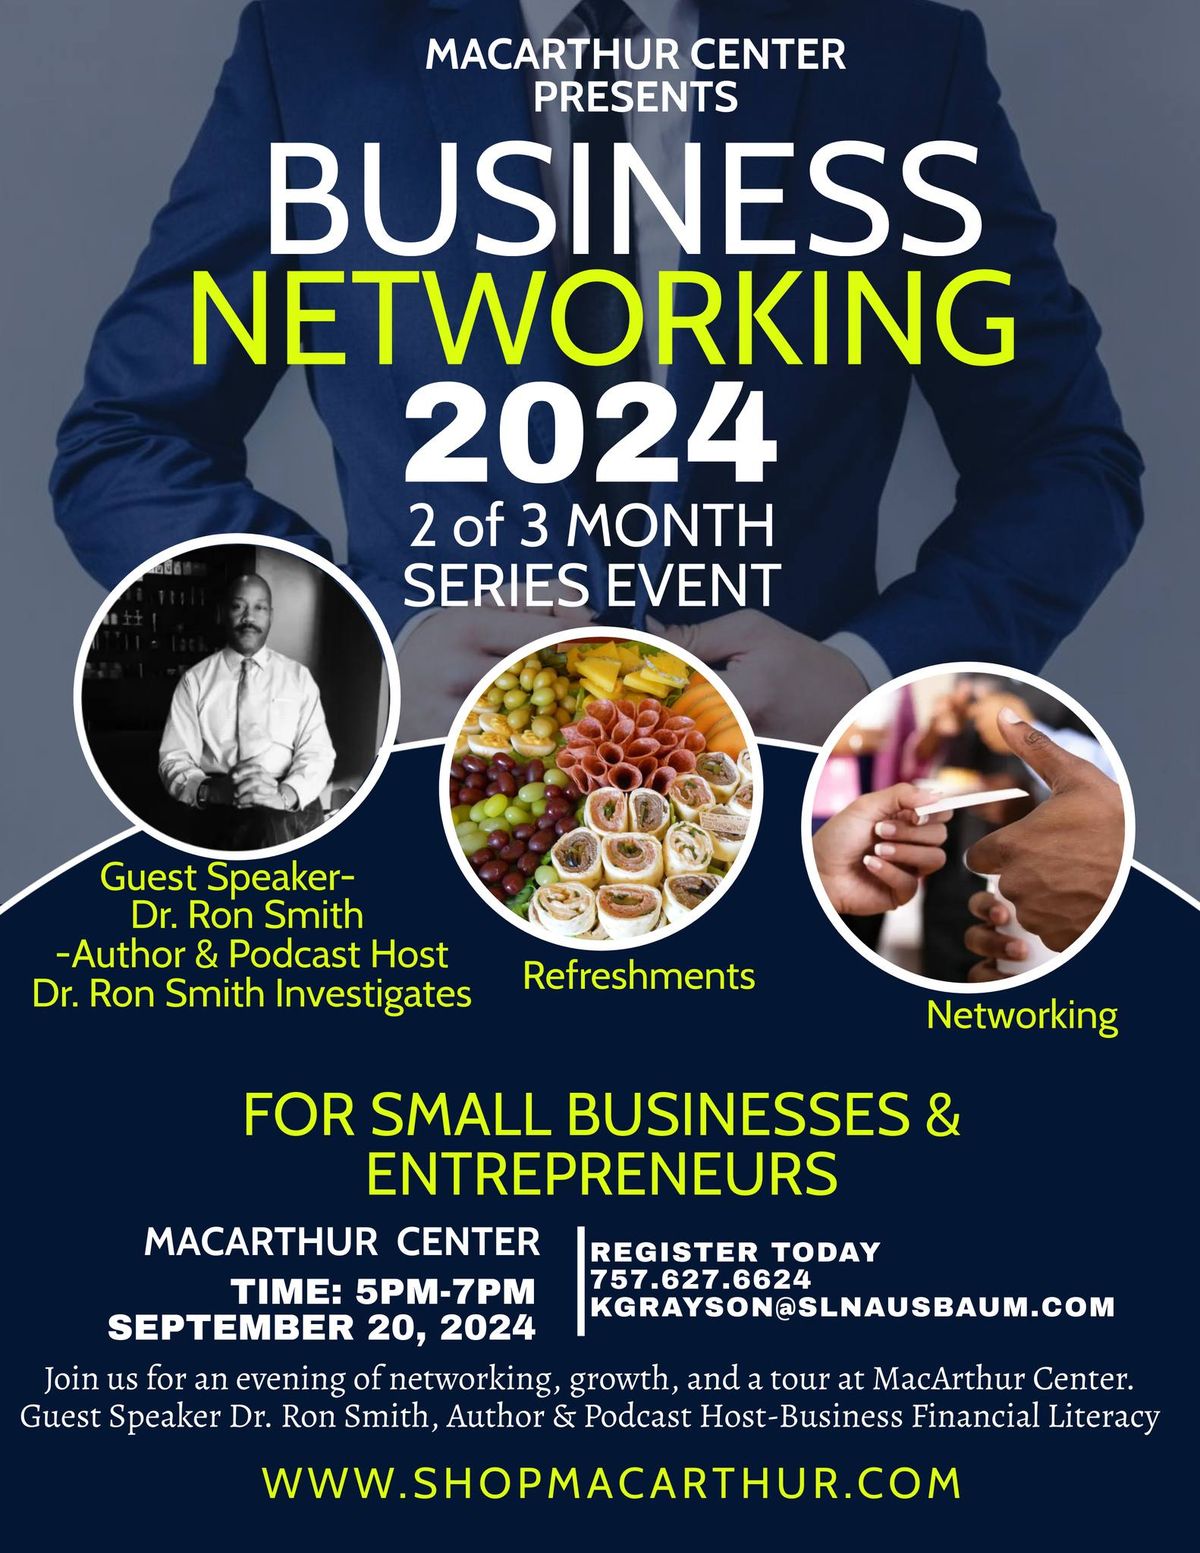 Business Networking Series 2 of 3 